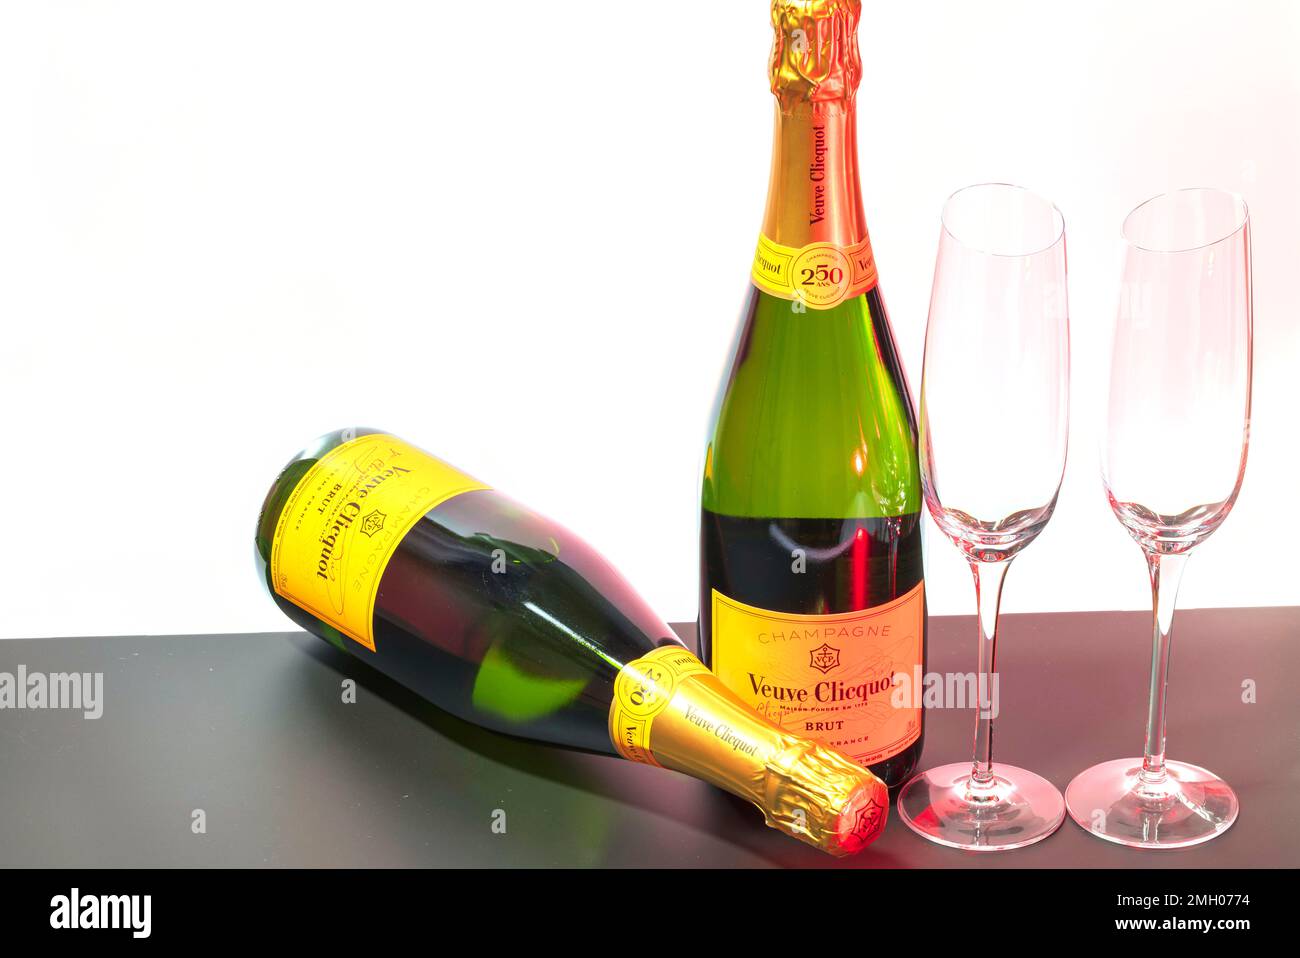 Veuve clicquot ponsardin champagne label hi-res stock photography and  images - Alamy